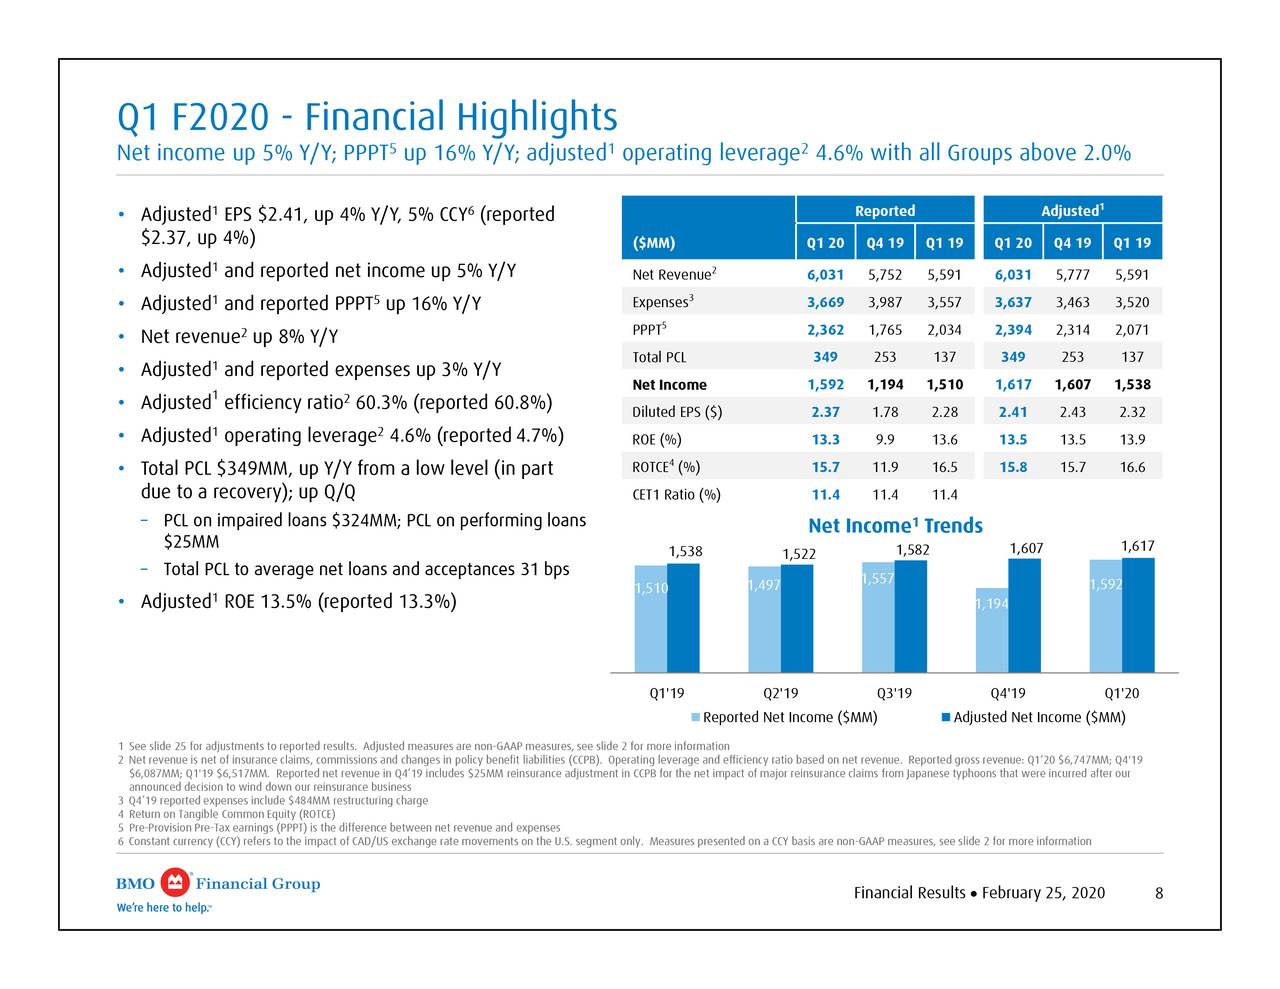 Bank of Montreal 2020 Q1 Results Earnings Call Presentation (NYSE